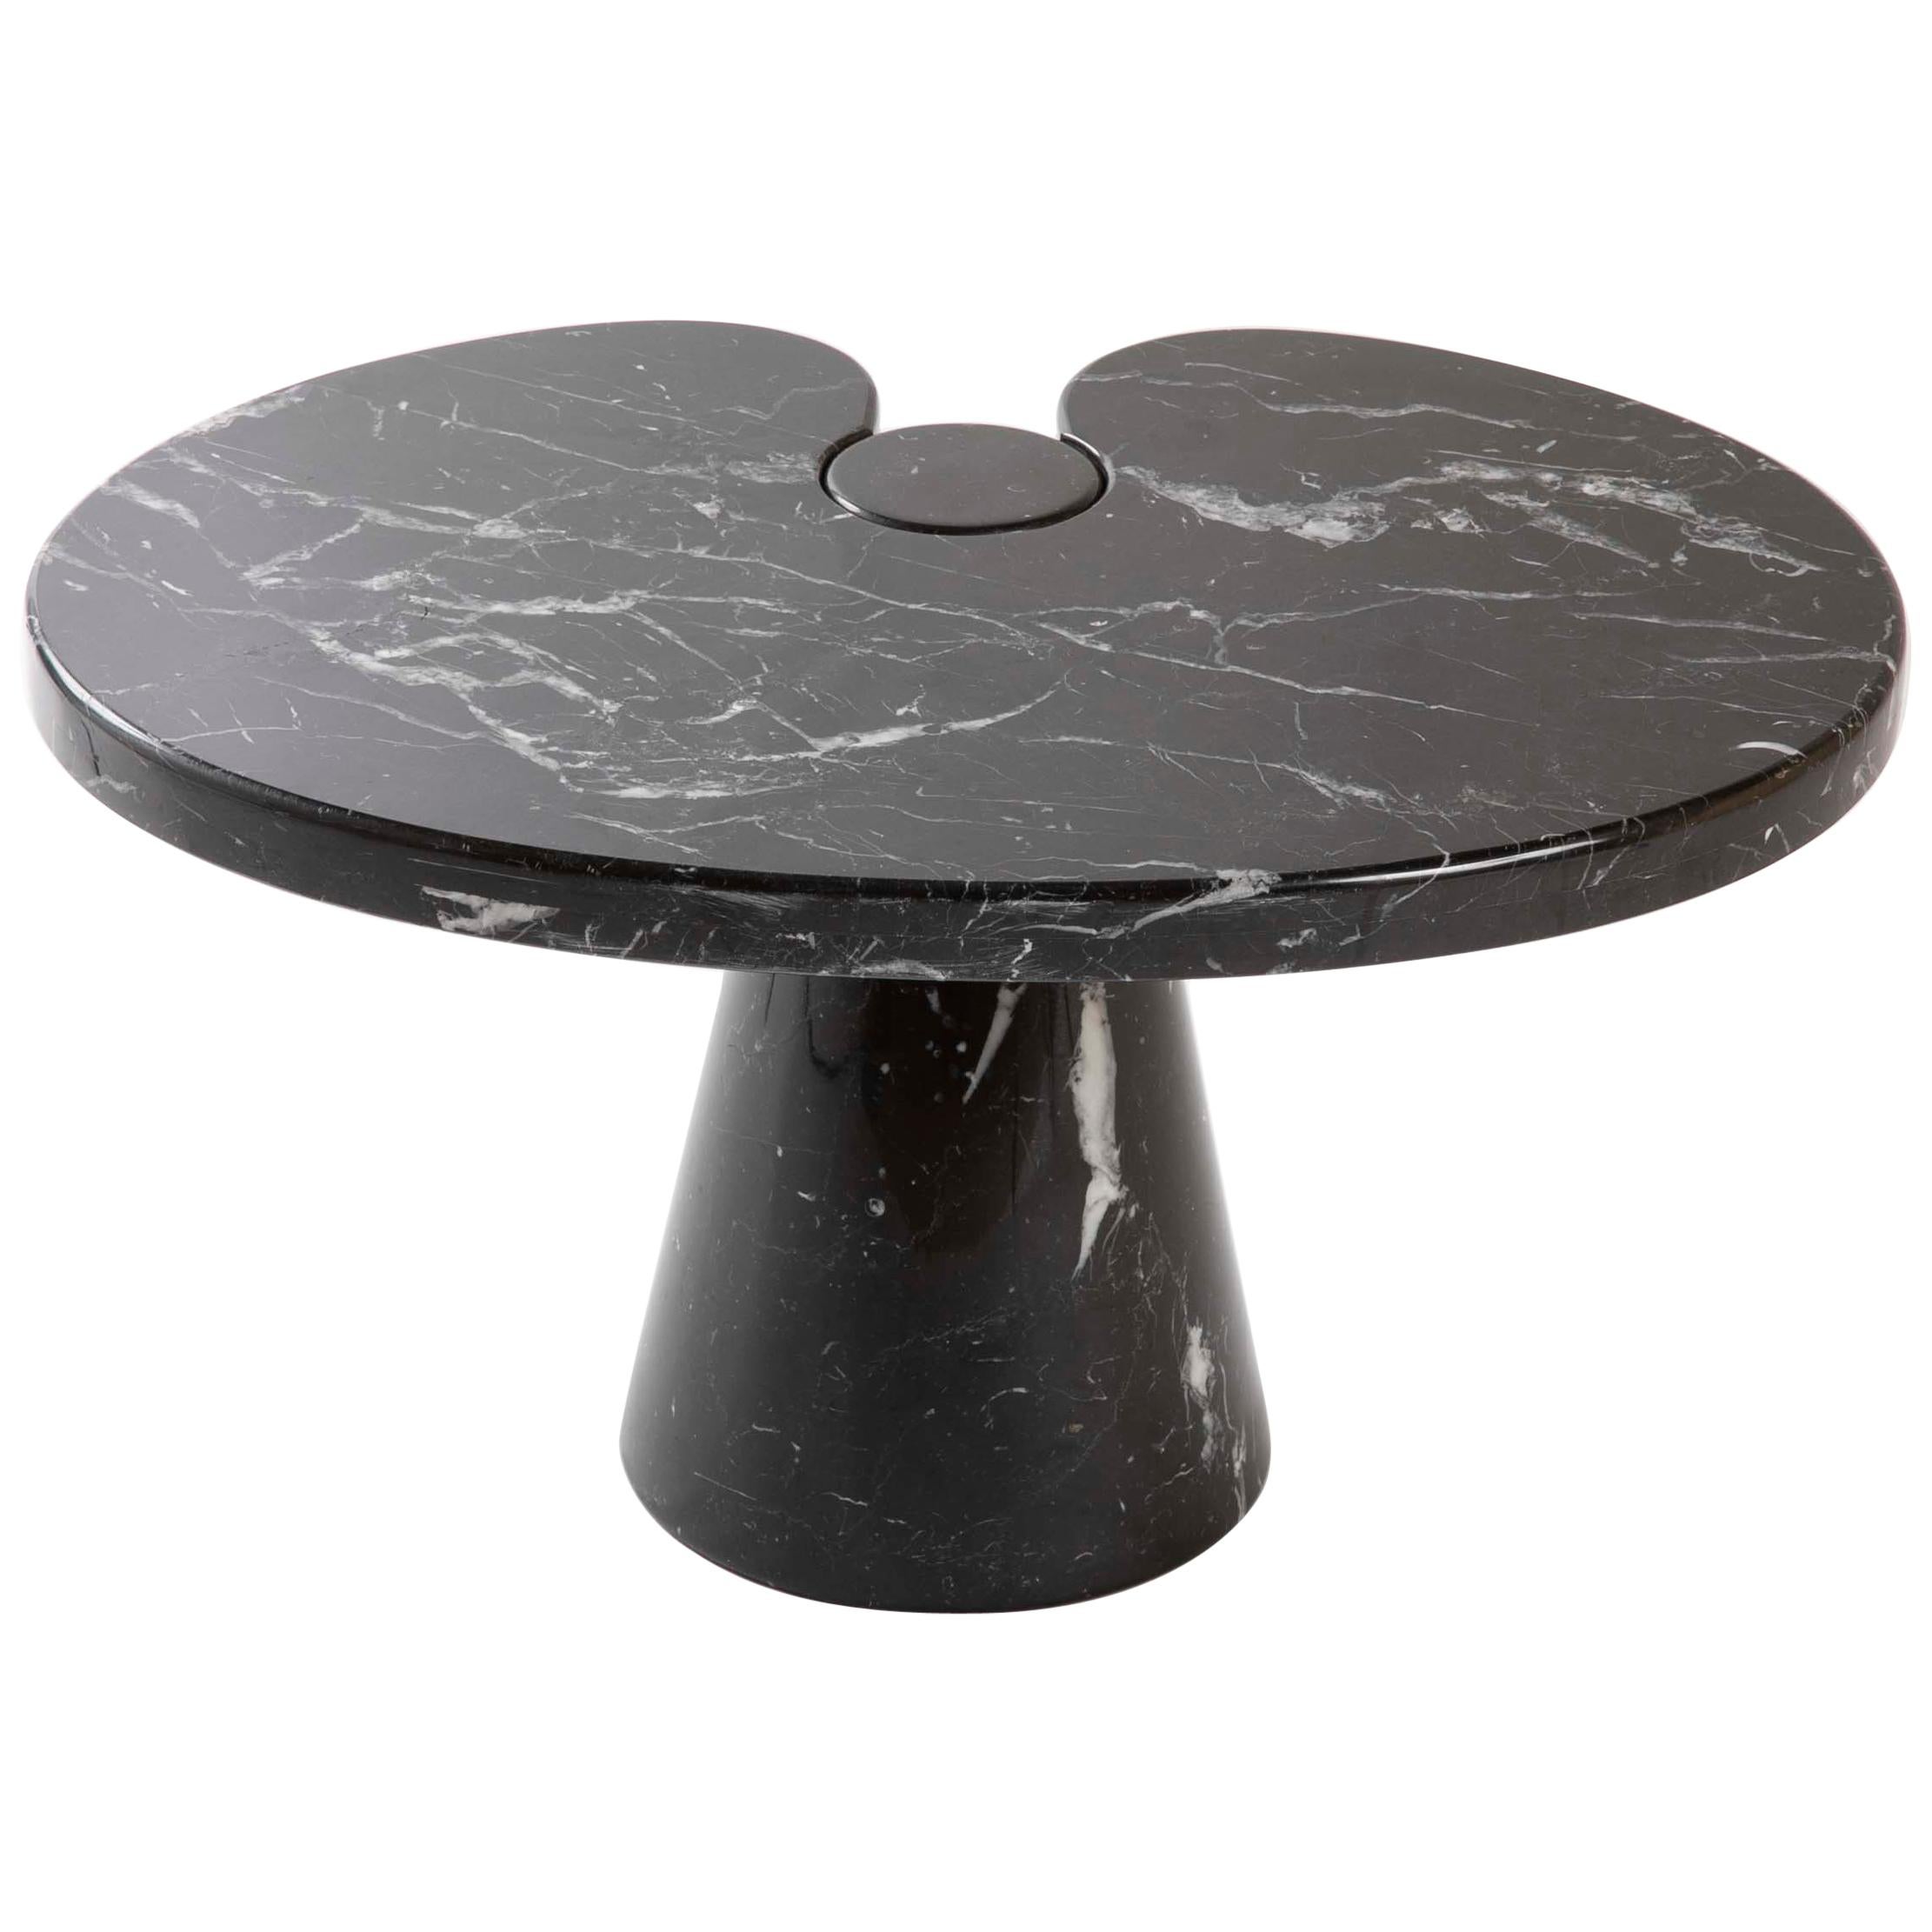 Organic Form Nero Marquina Marble Side Table Designed by Angelo Mangiarotti